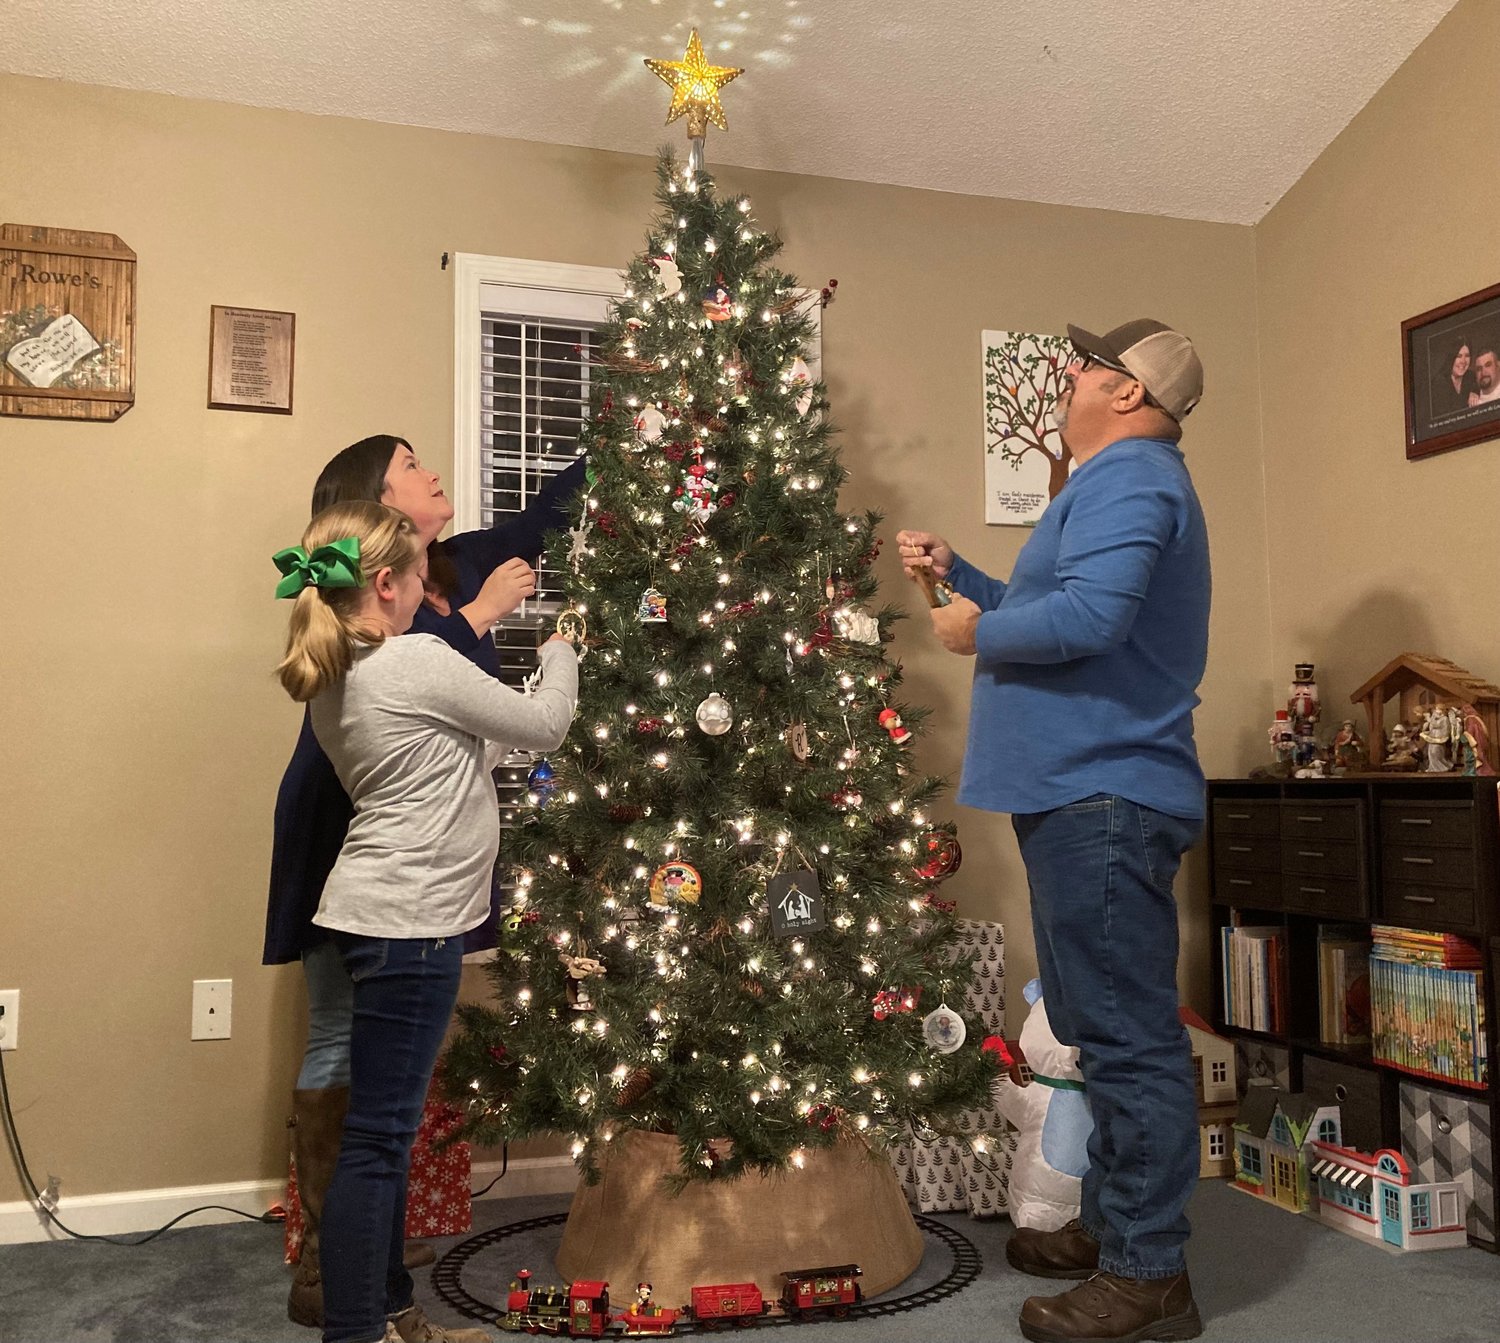 The Rowe family of southeast Georgia enjoy the Christmas season after receiving a life-saving gift. (Index/Roger Alford)